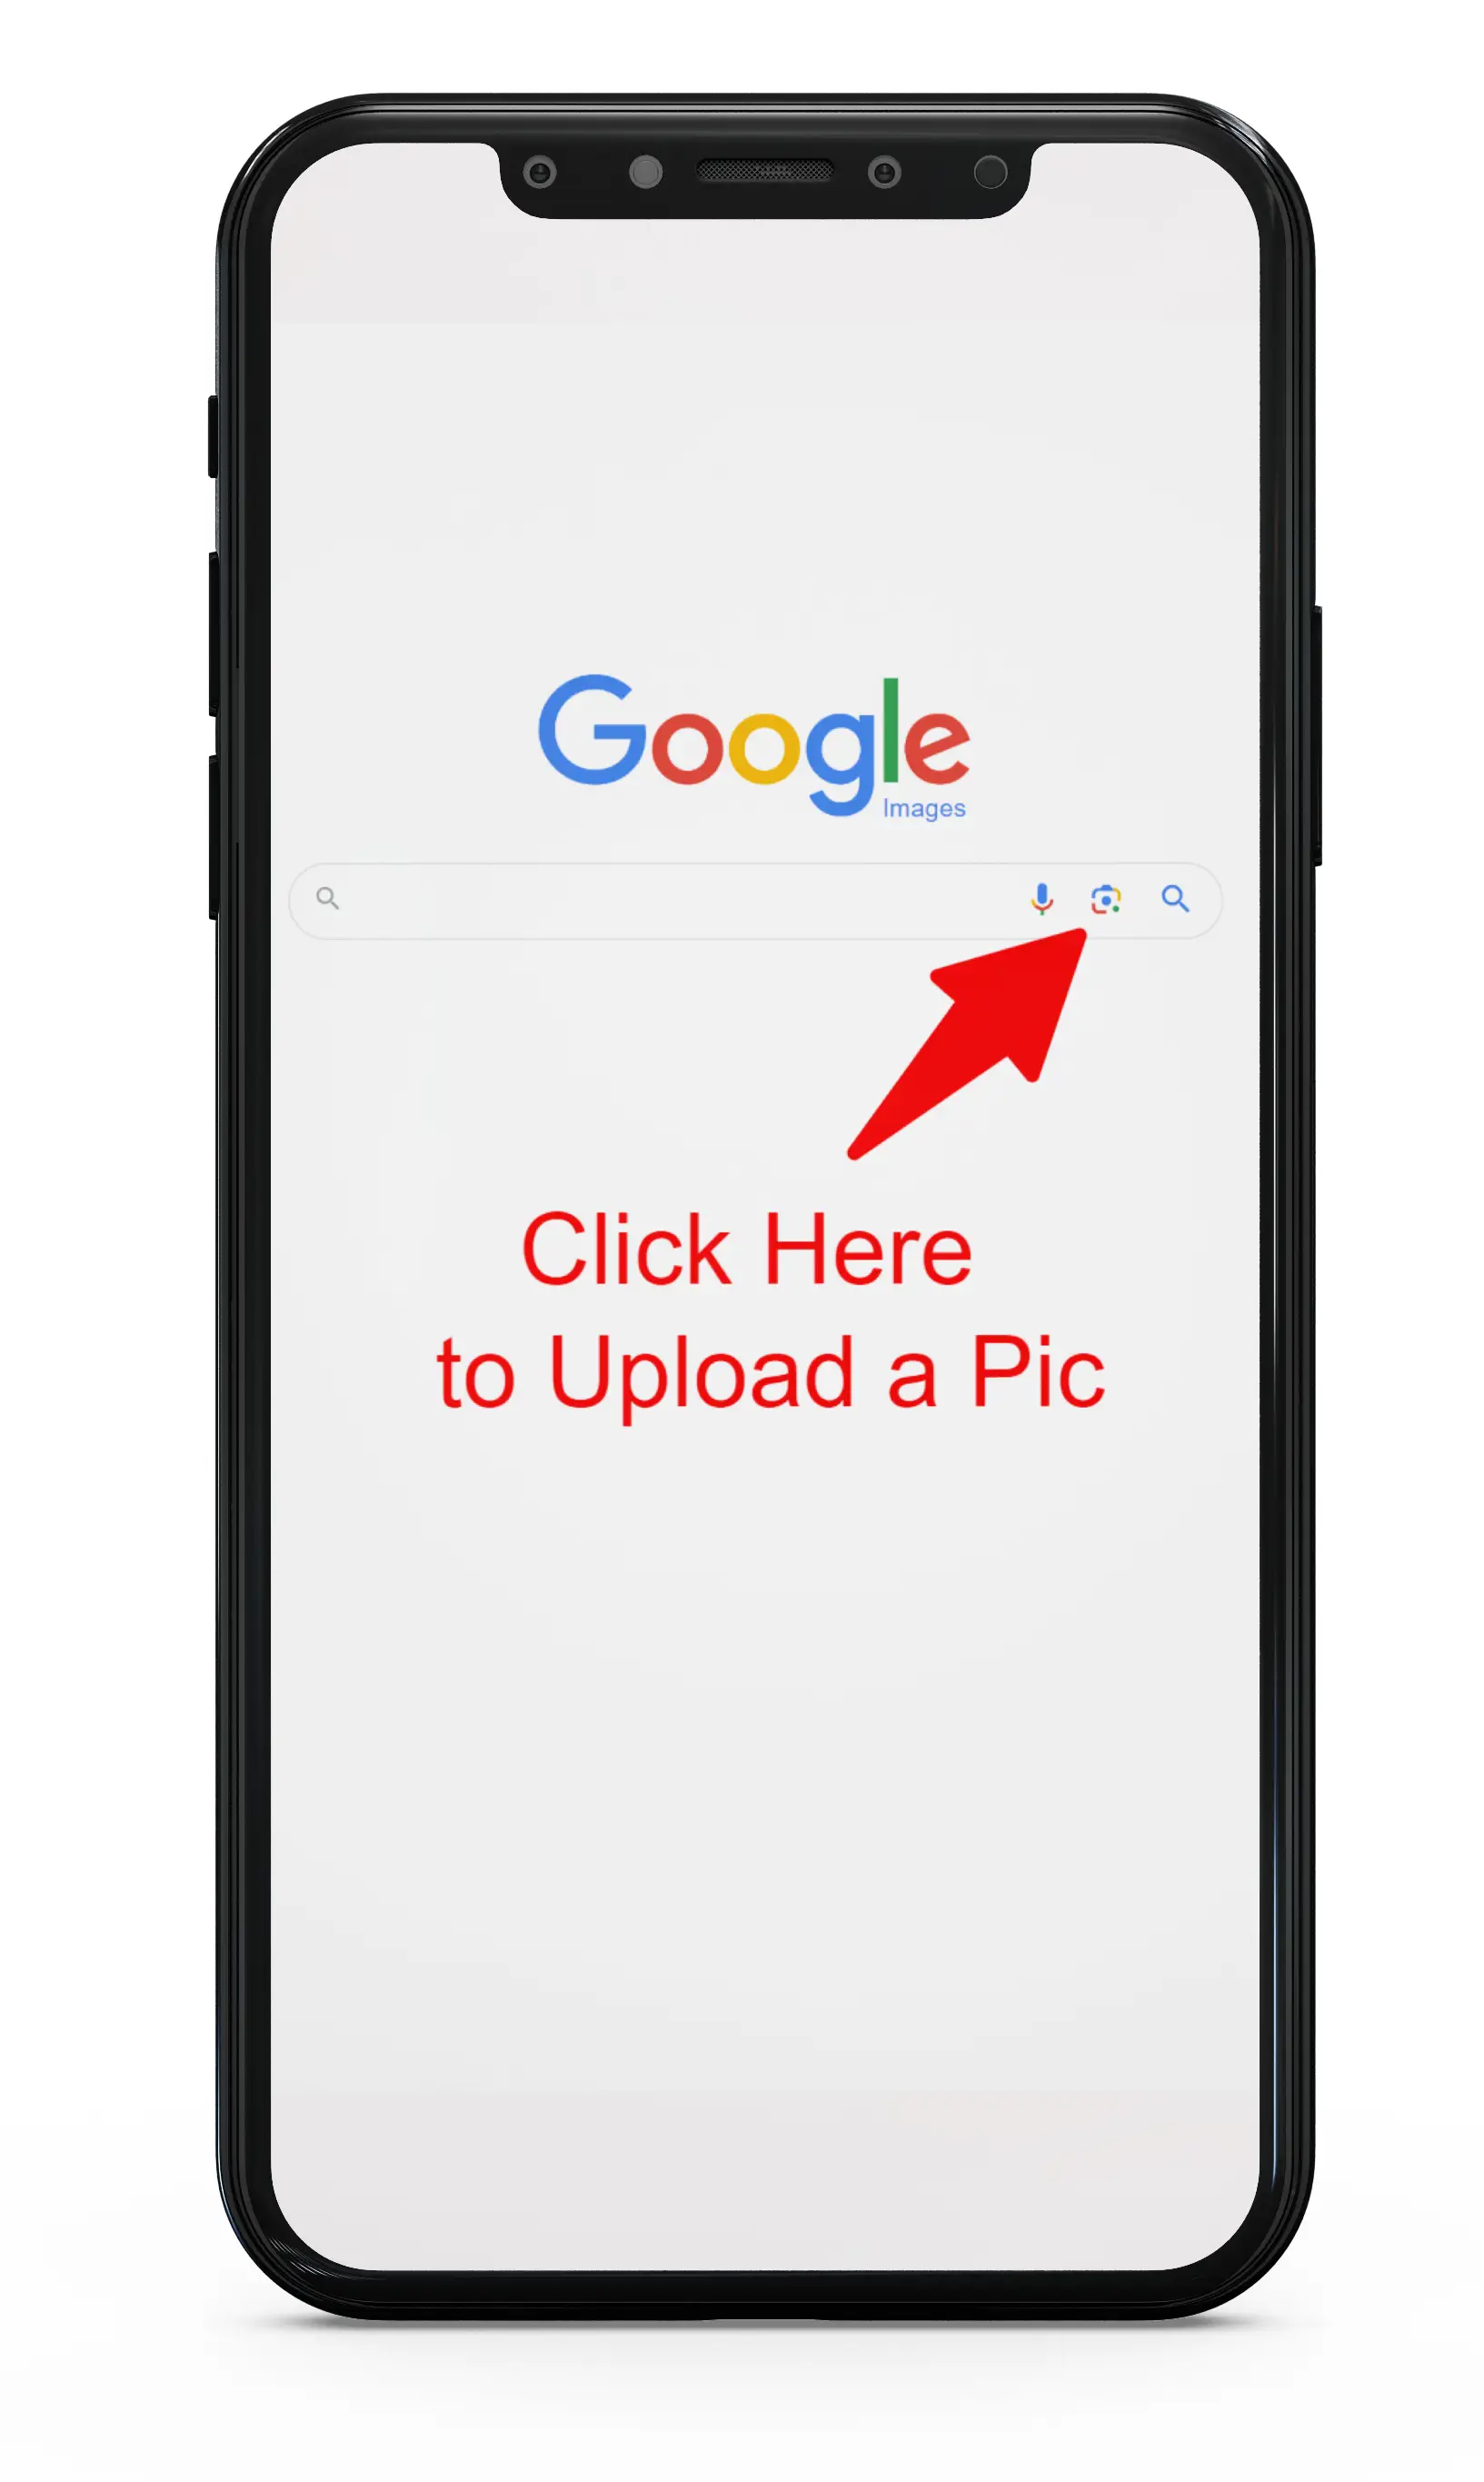 Google Images Reverse Image Search on Mobile